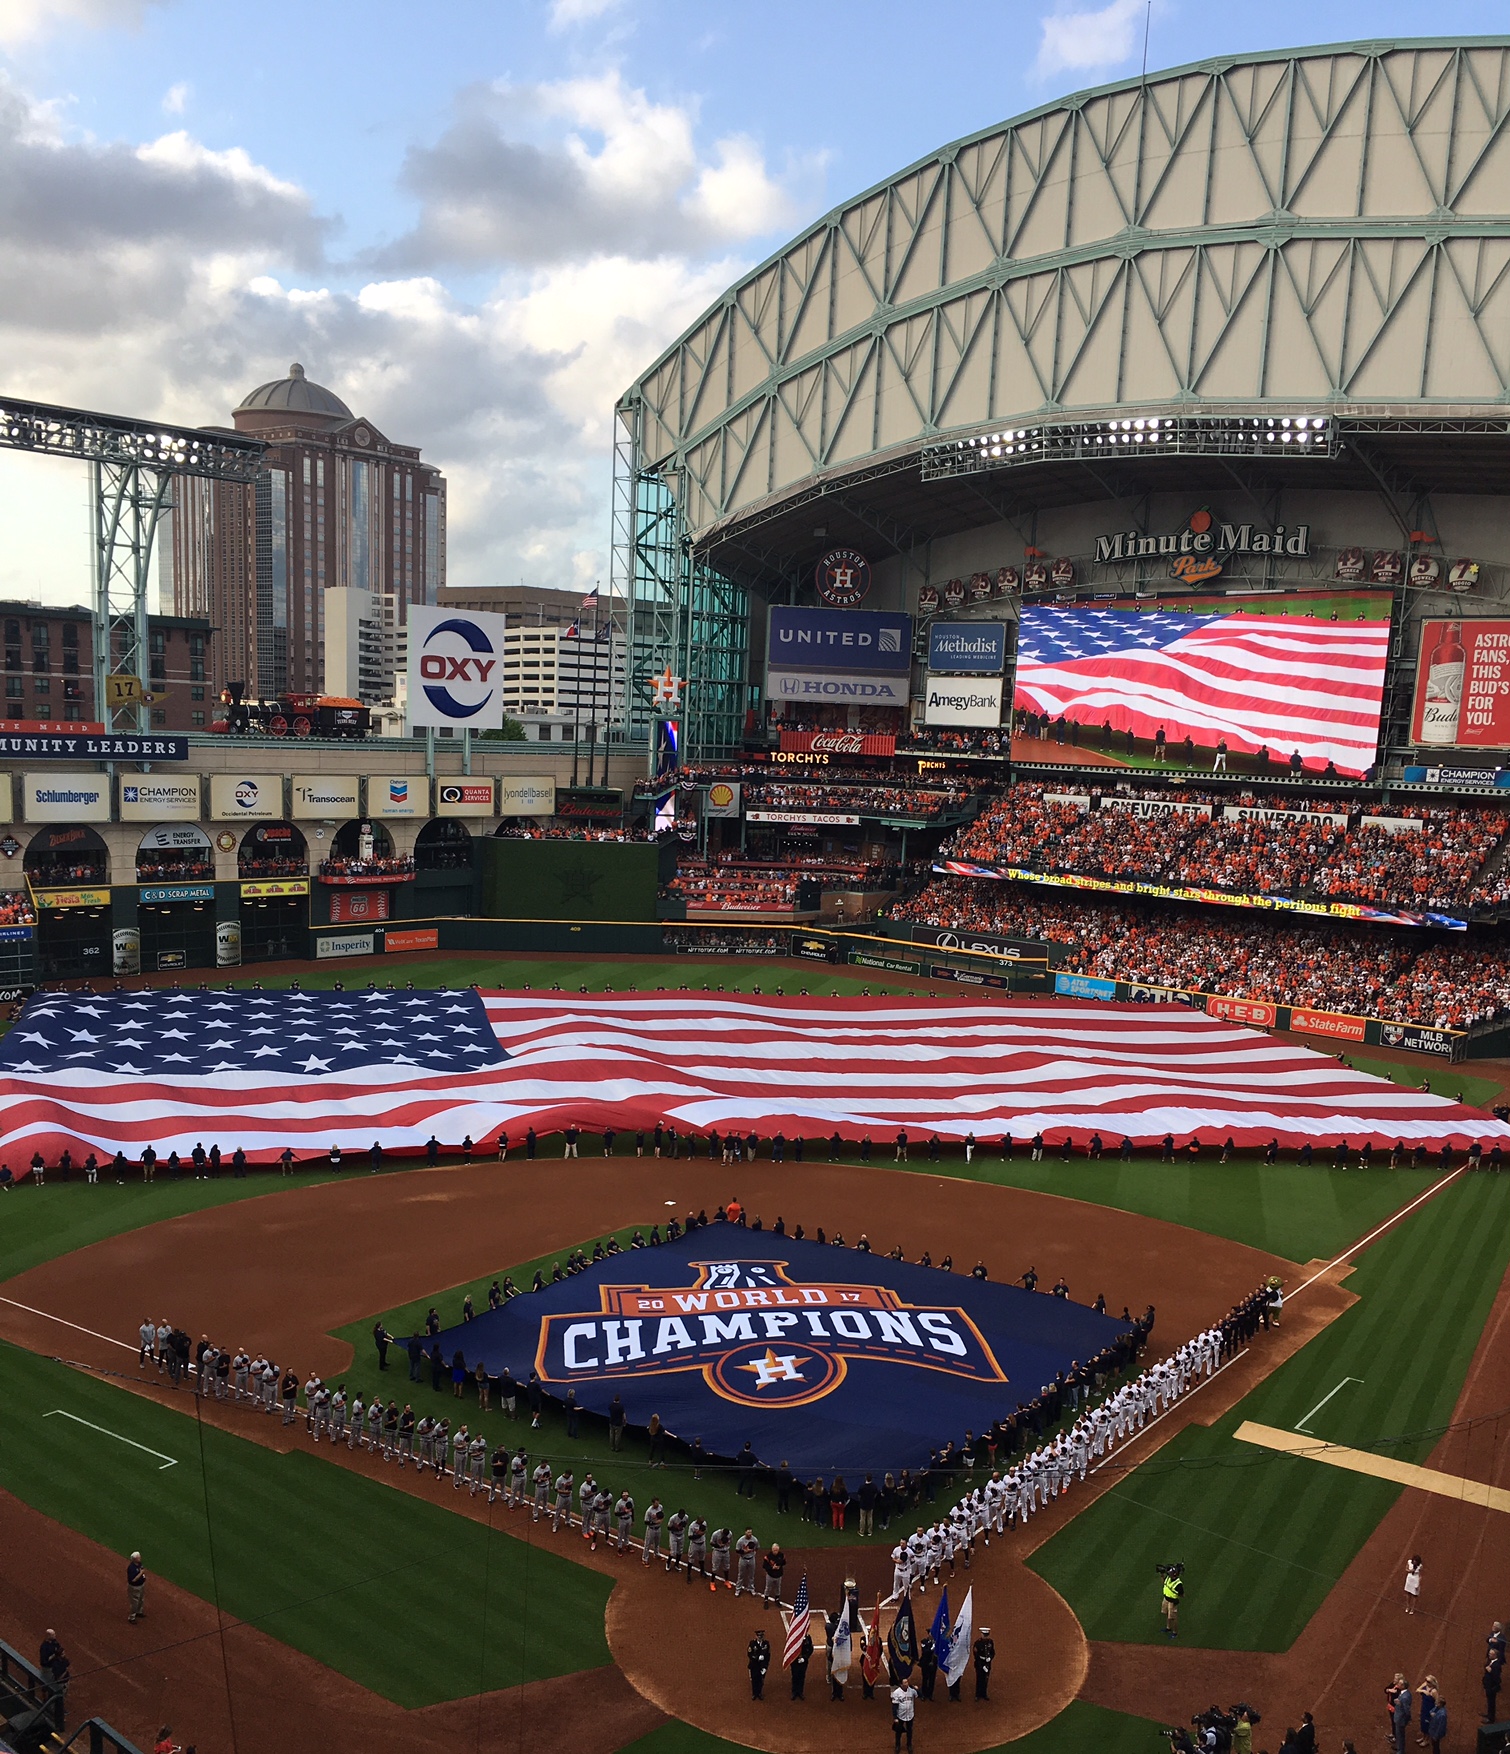 Minute Maid Park on opening day, 2018. Photo courtesy of Managing Editor, Justin Murphy.